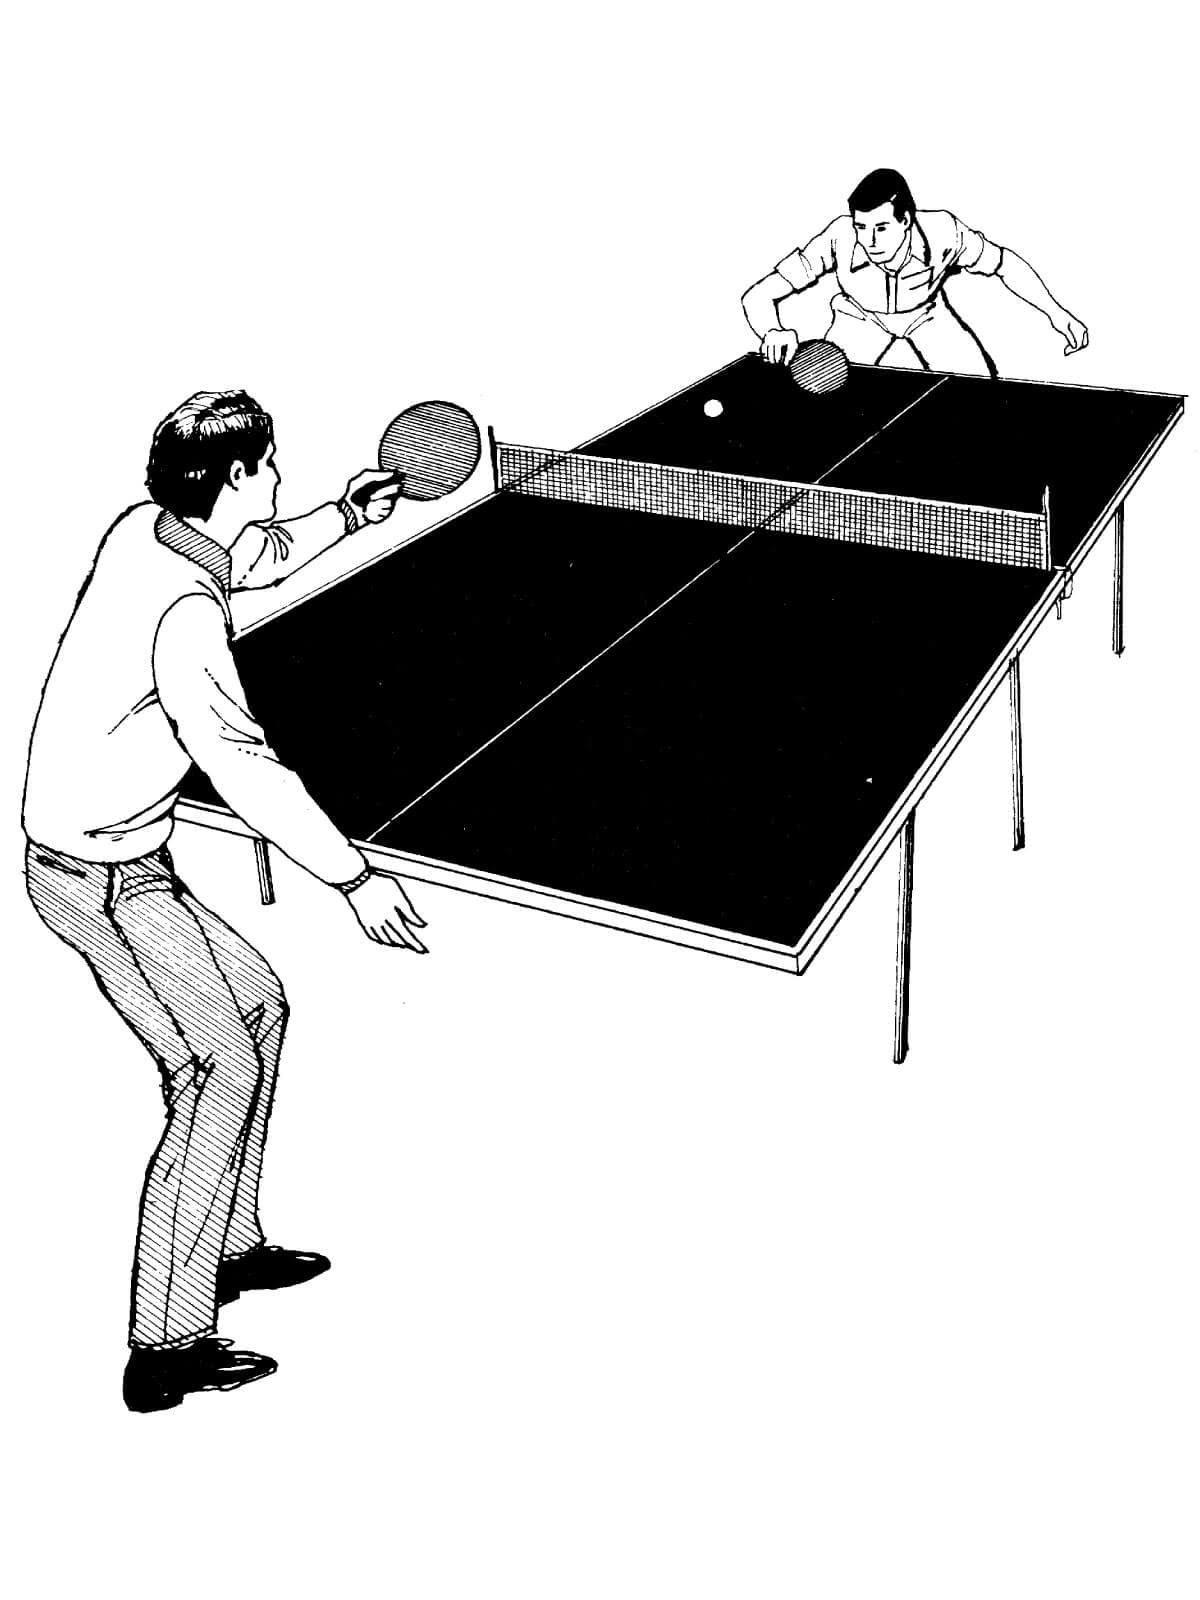 A Game Of Ping Pong Image